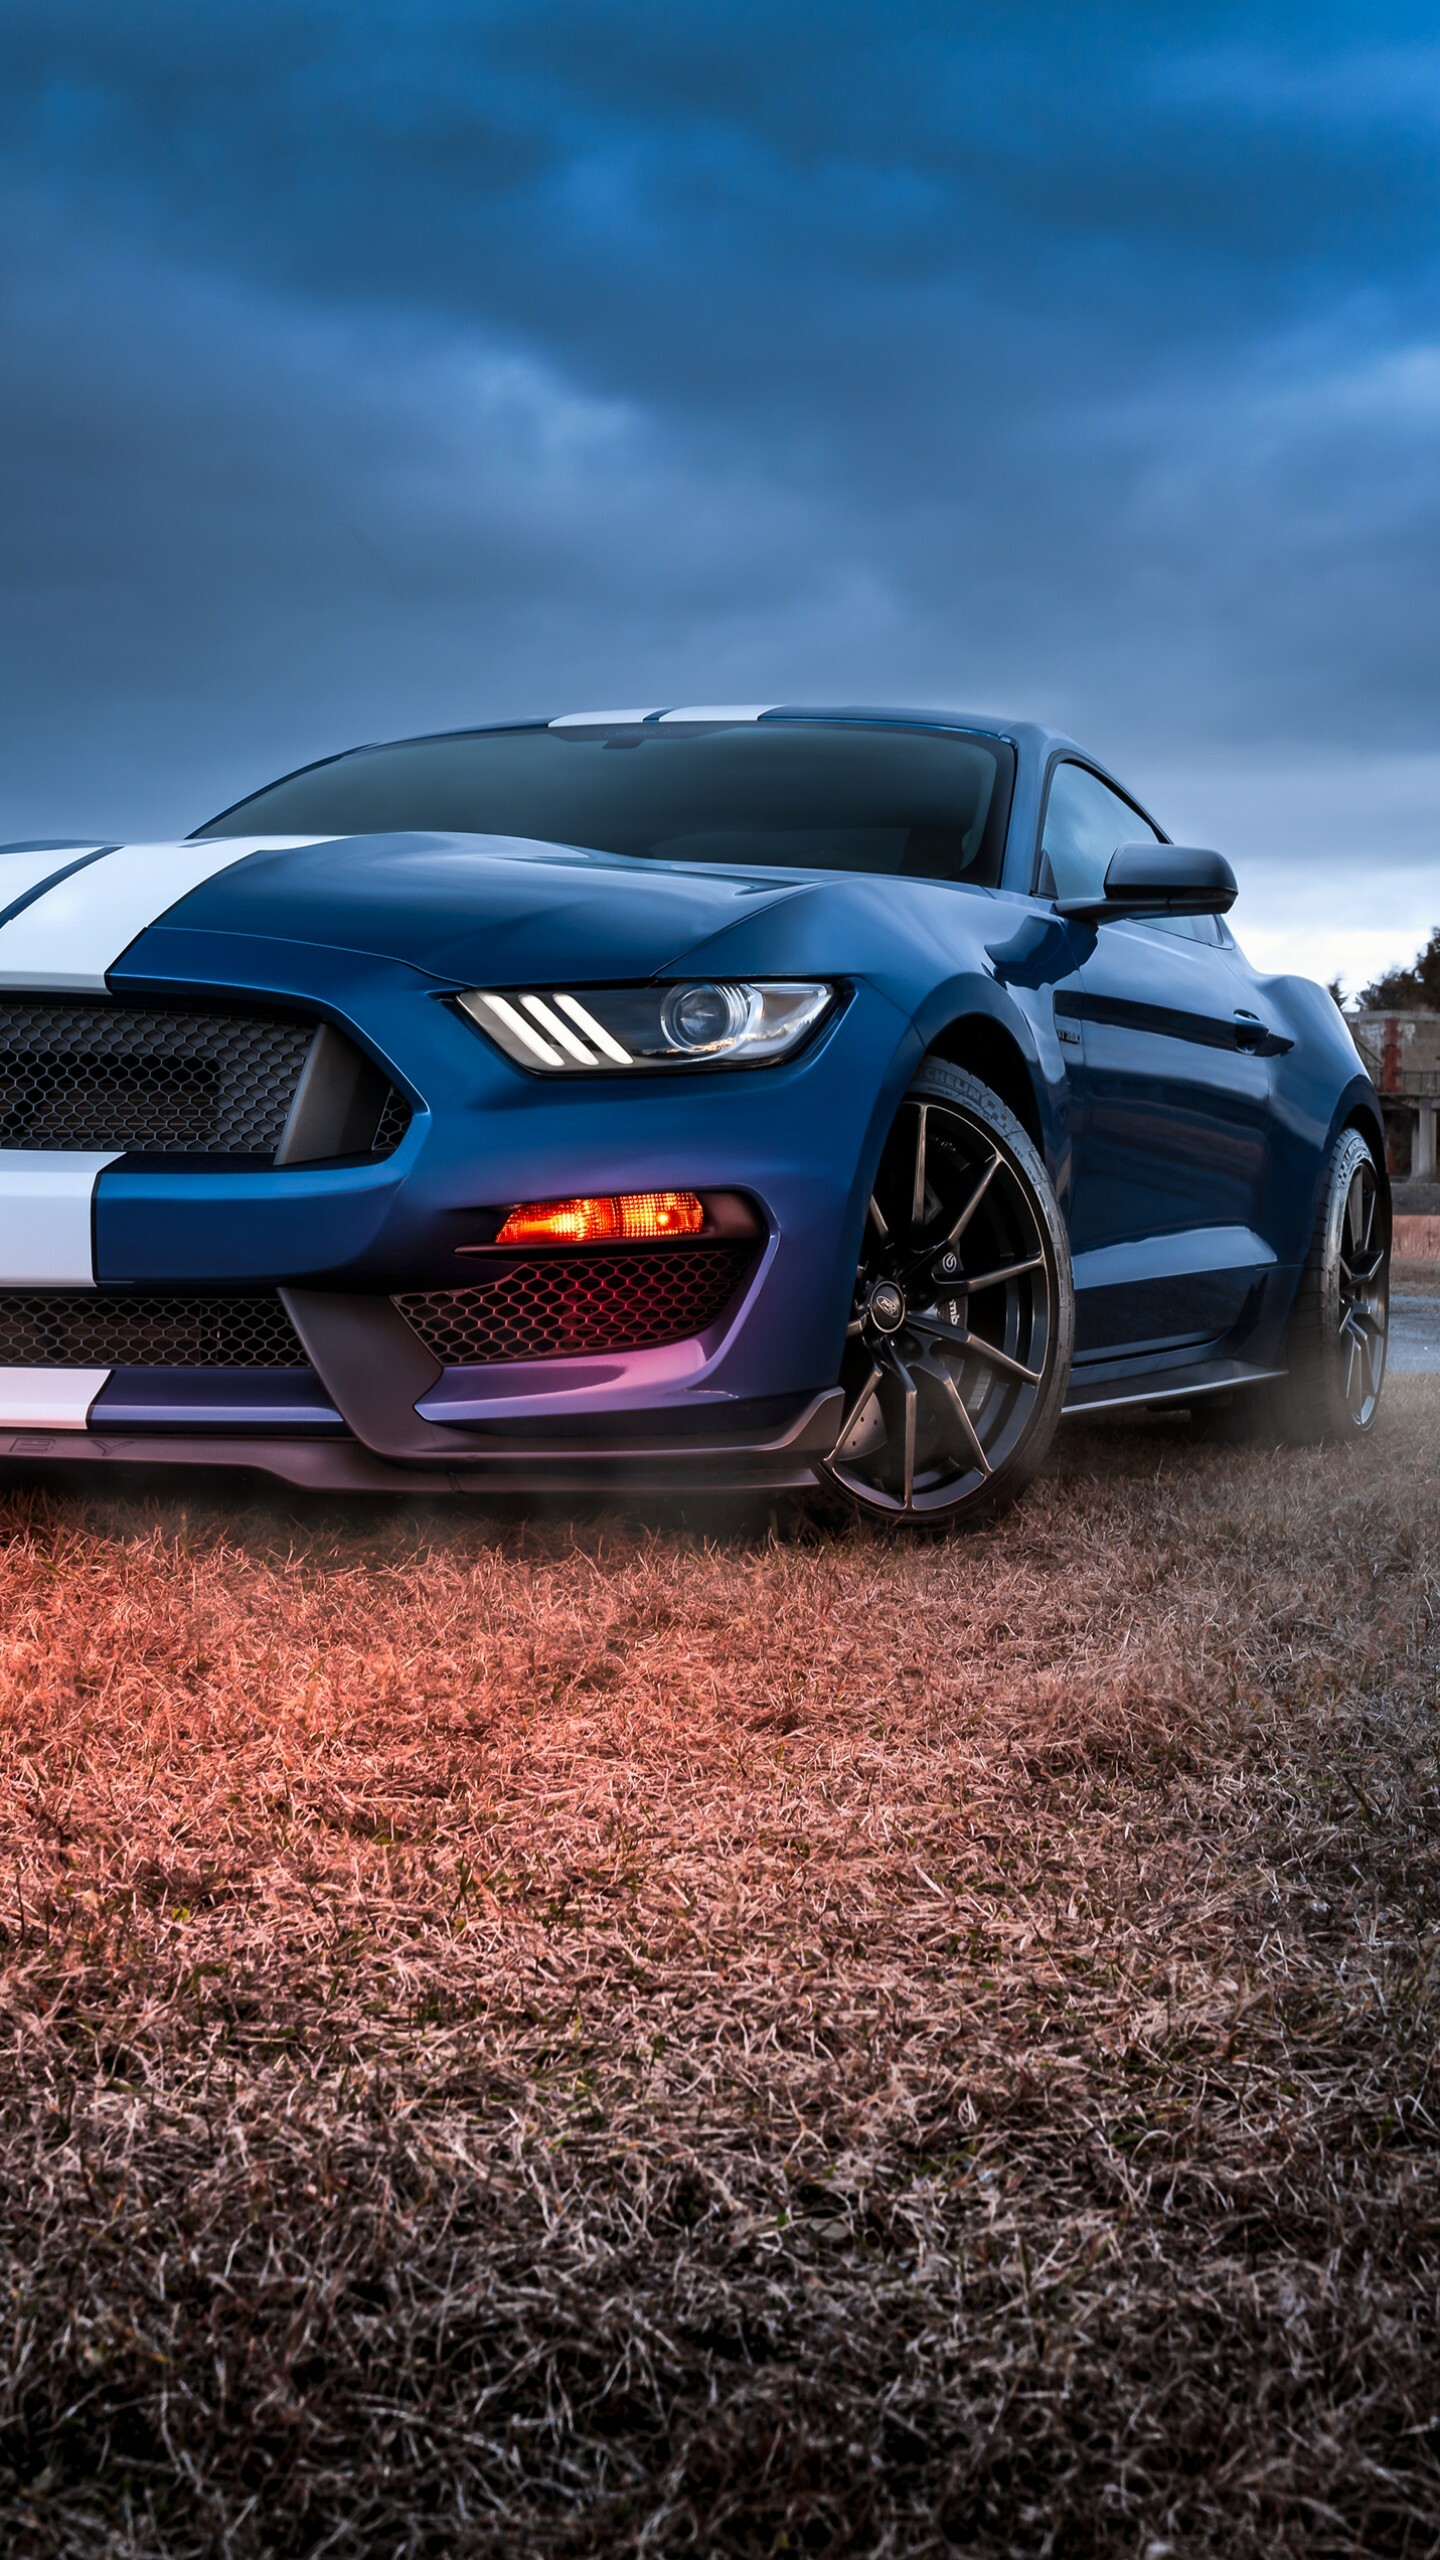 Ford: Shelby GT500, The highest-performing Mustang rolling out of Ford's factory. 1440x2560 HD Wallpaper.